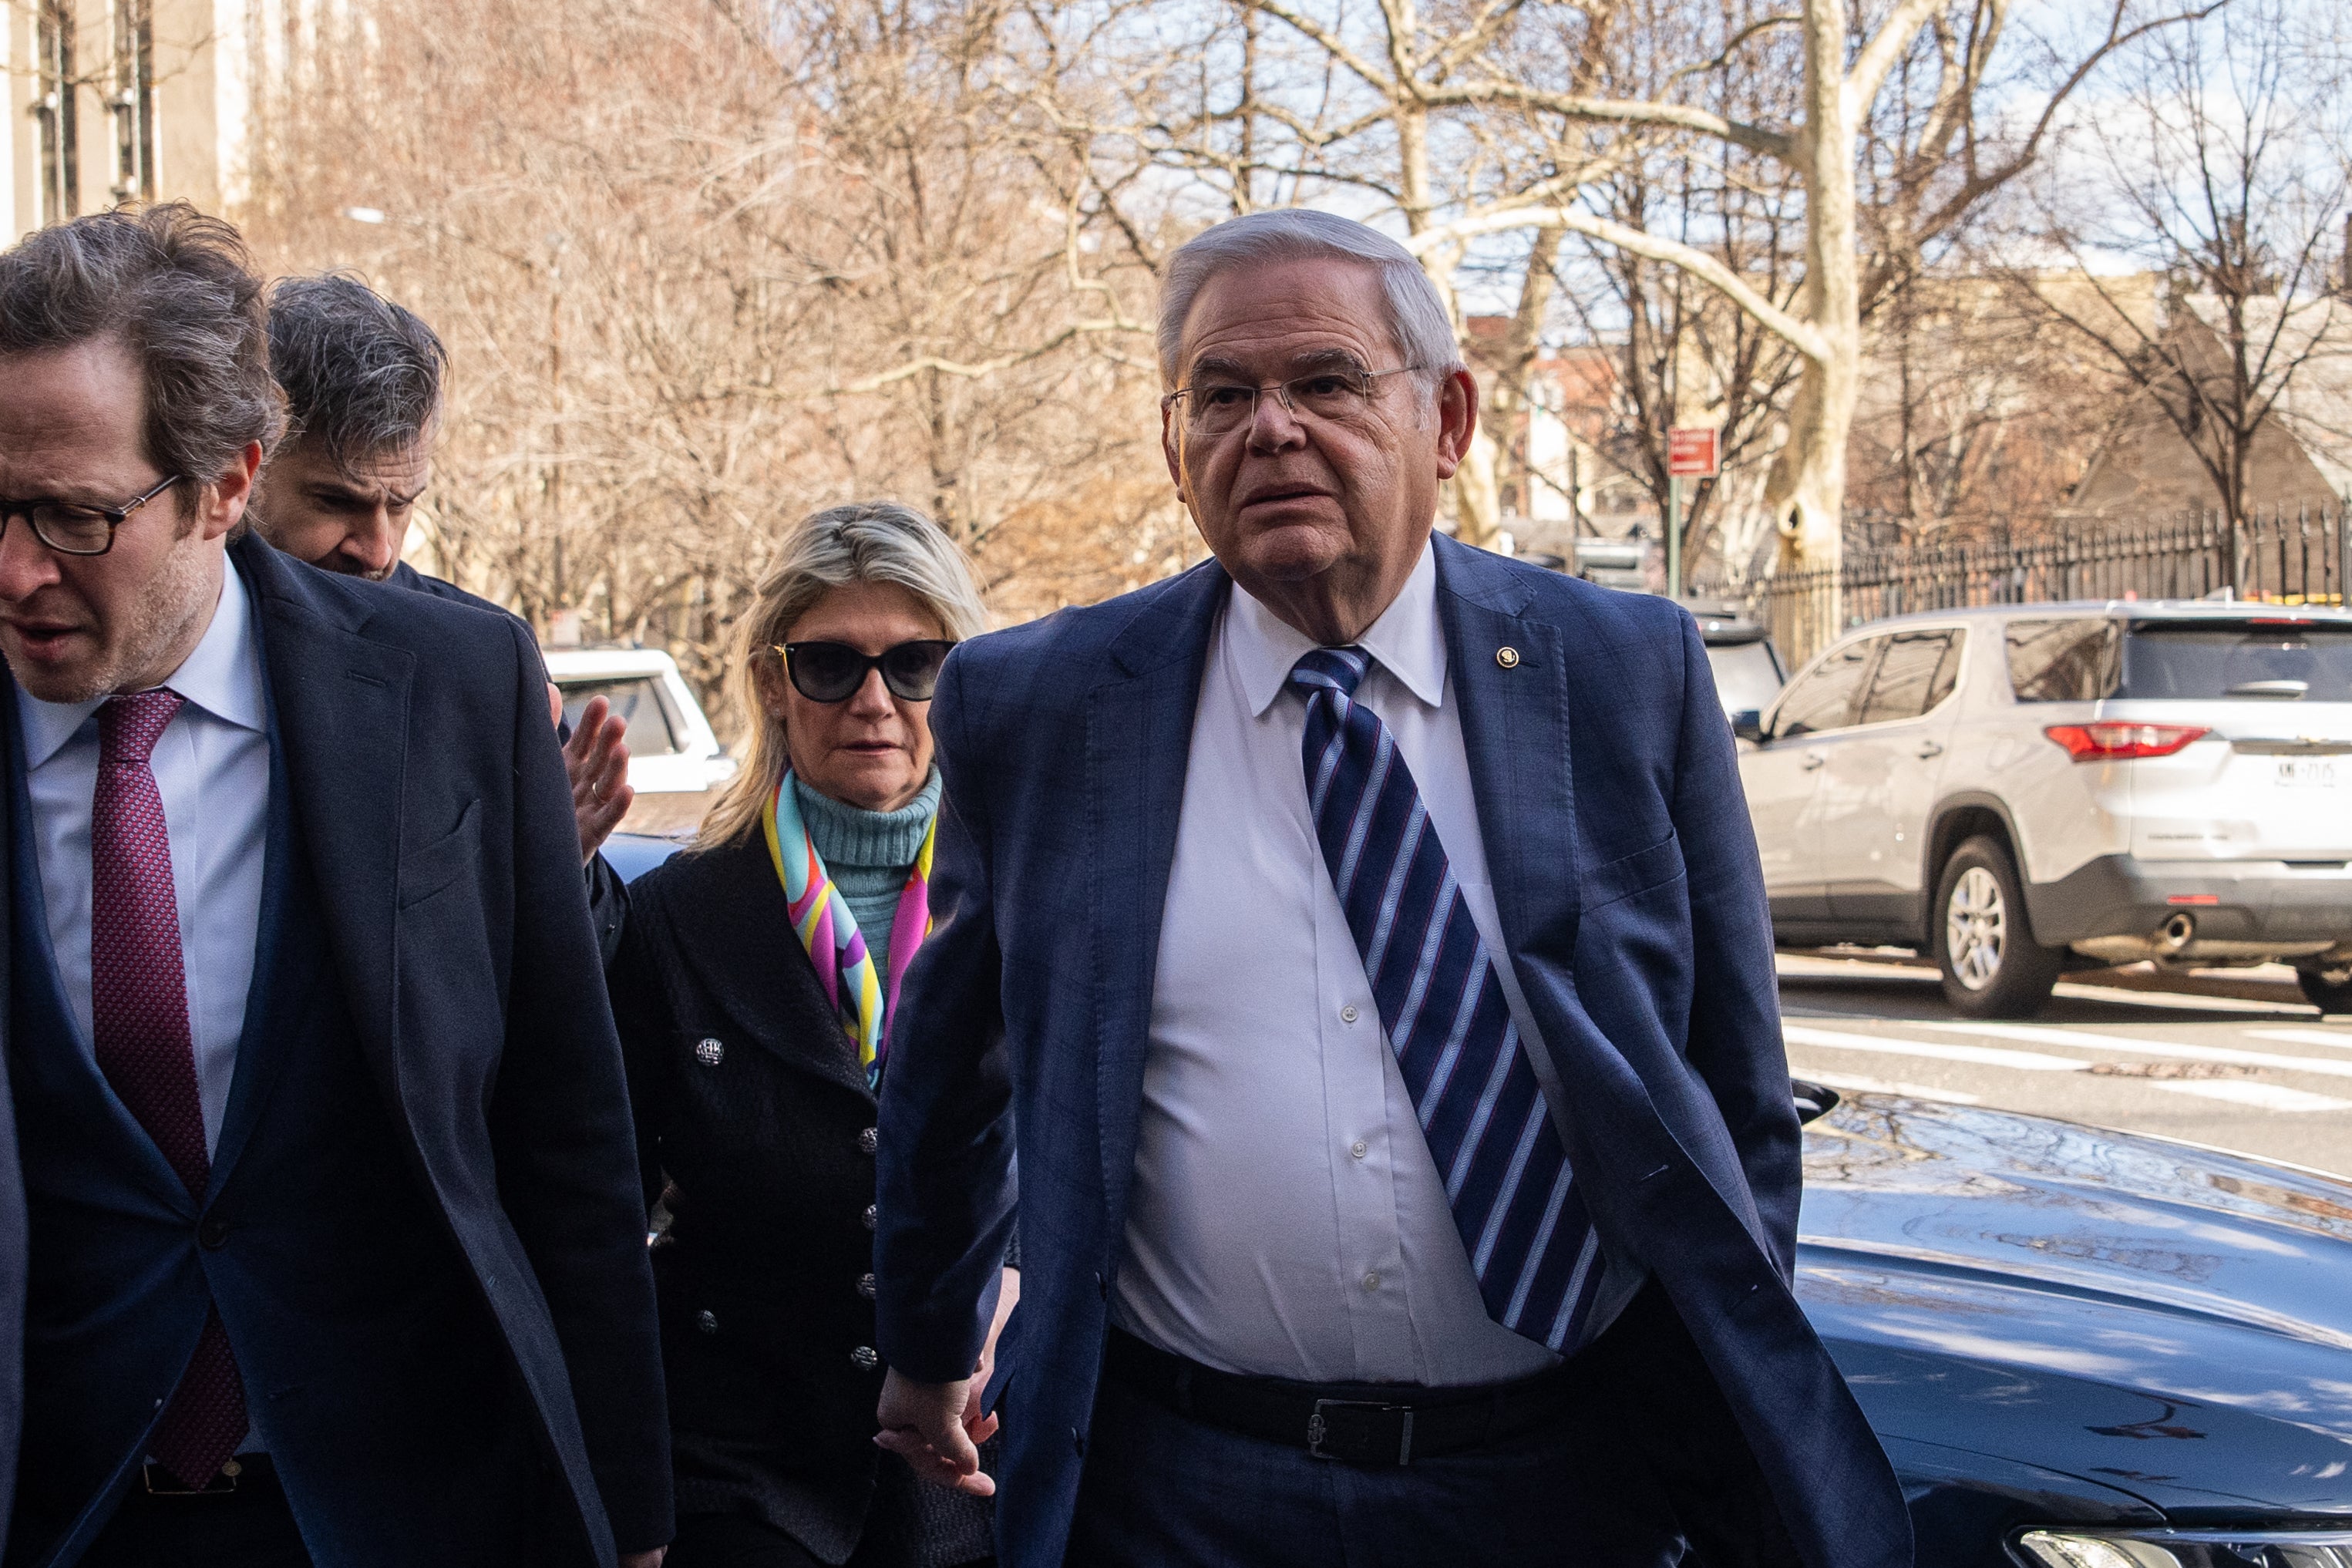 US Senator Bob Menendez arriving with his wife Nadine Menendez at Manhattan Federal Court, in New York City for his arraignment in March